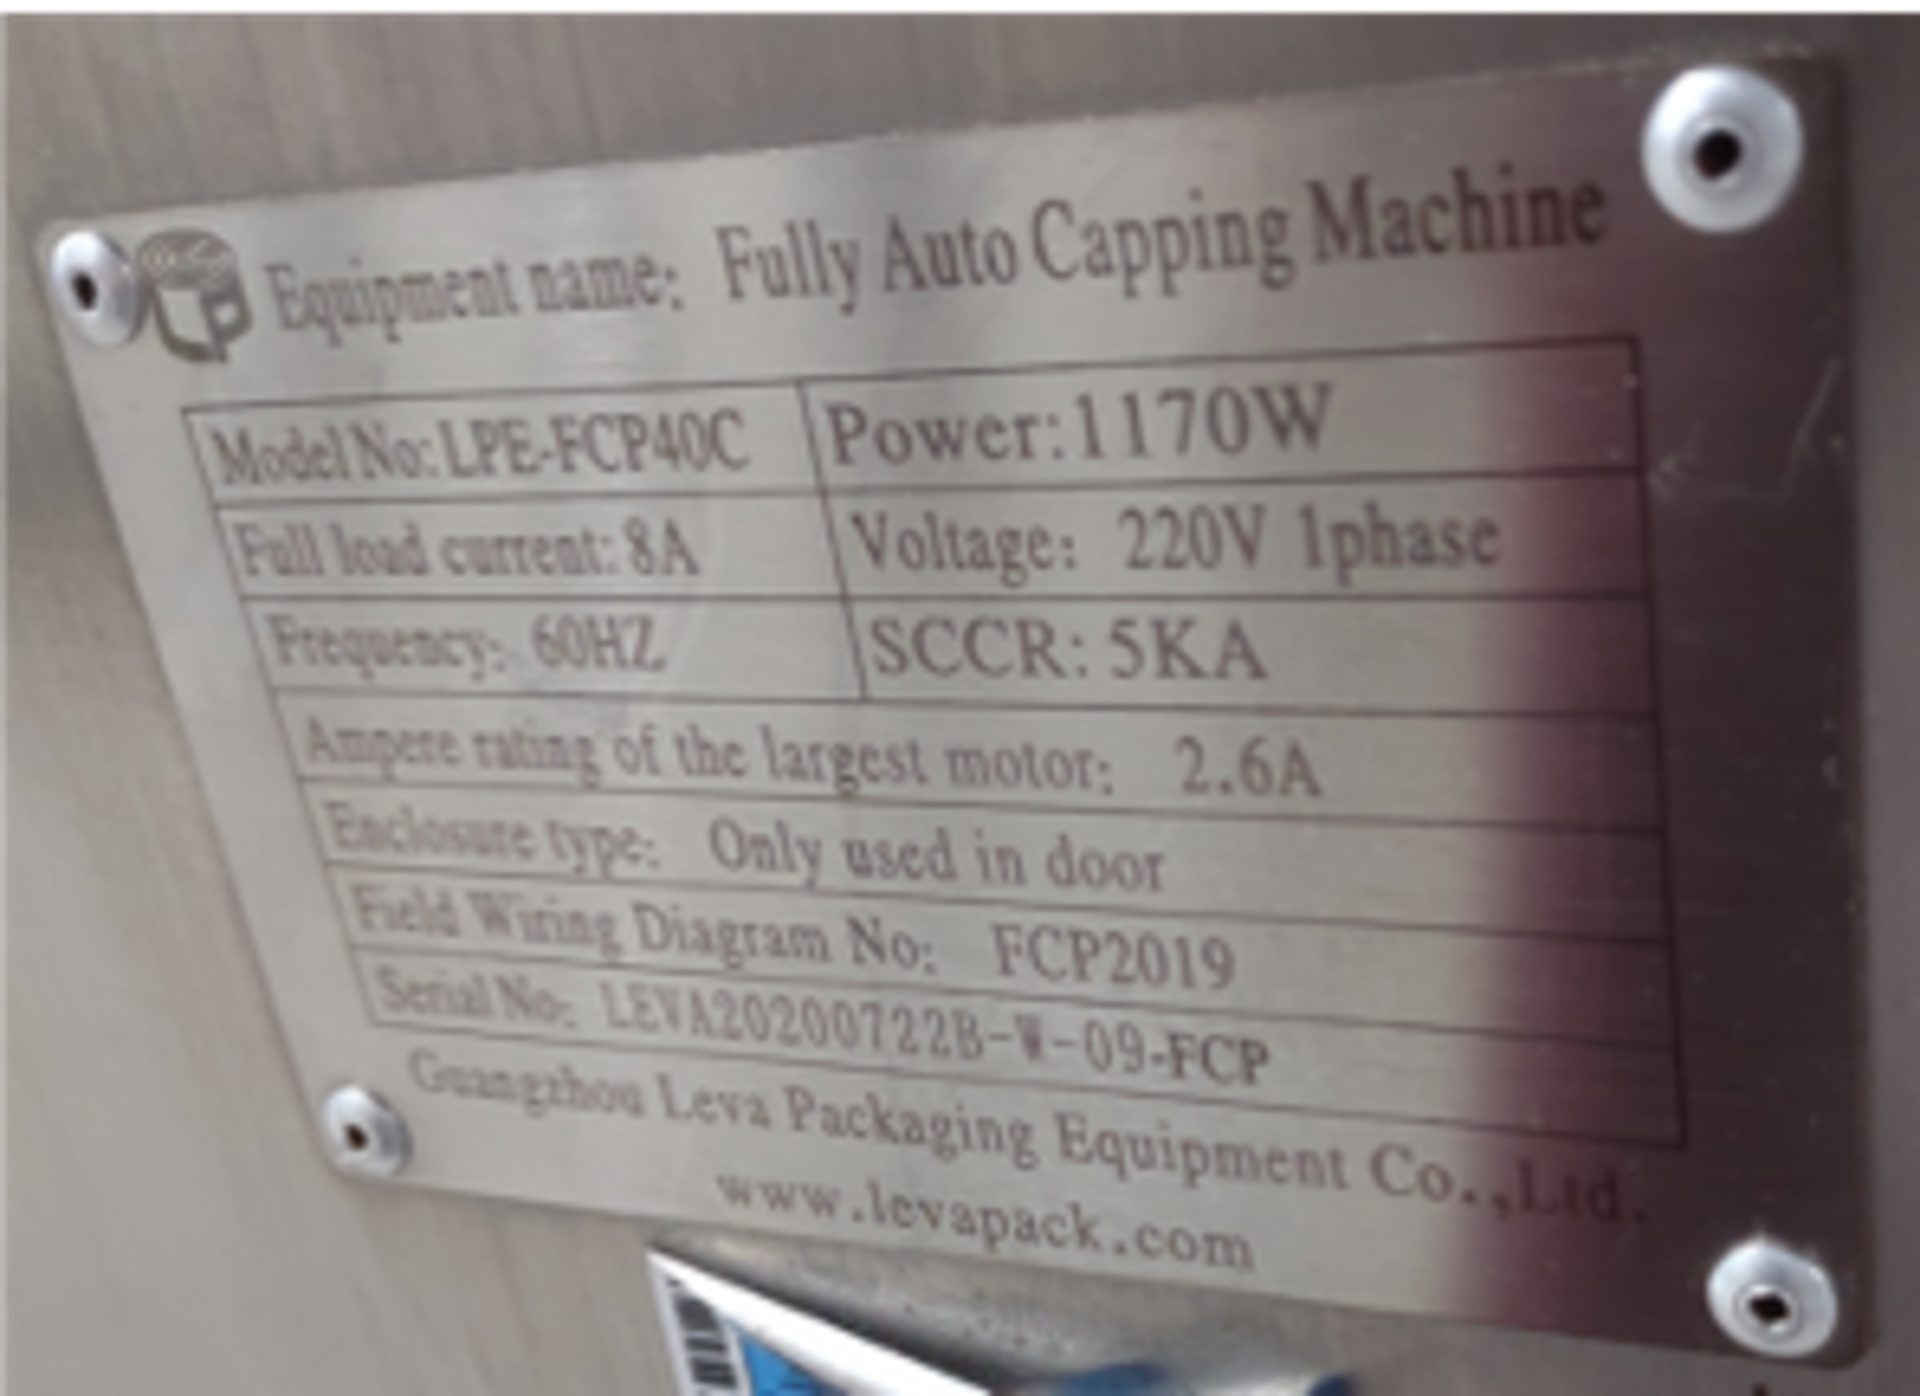 (Located in Evart, MI) LevaPack Fully Auto Capping Machine, Model# LPE-FCP40C, Serial# - Image 2 of 2